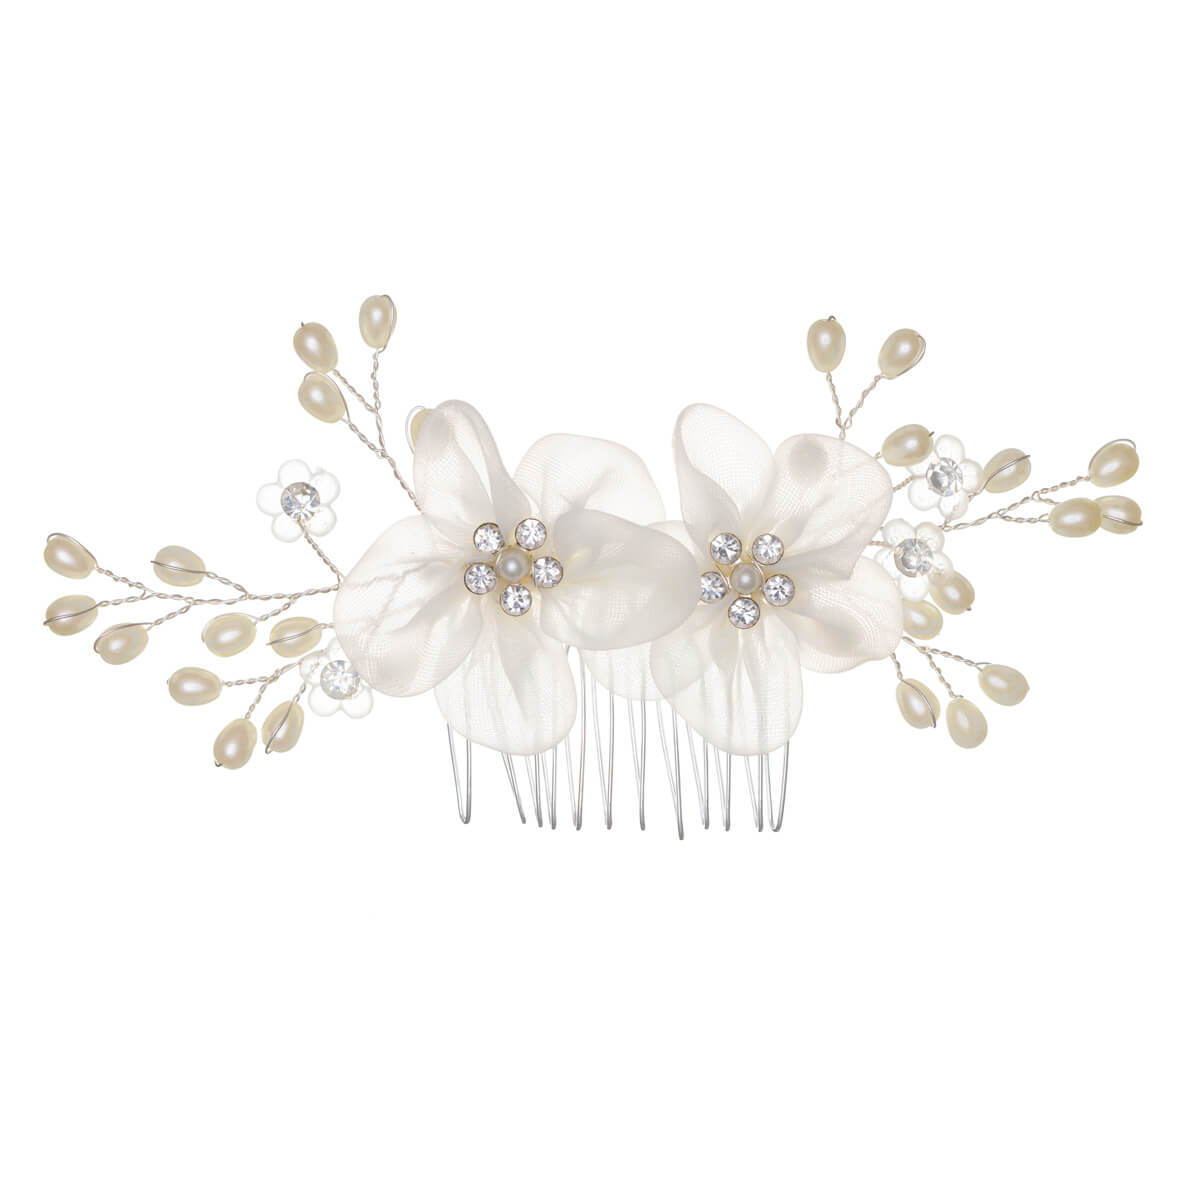 Shapely pearl hairband with side comb fabric flowers